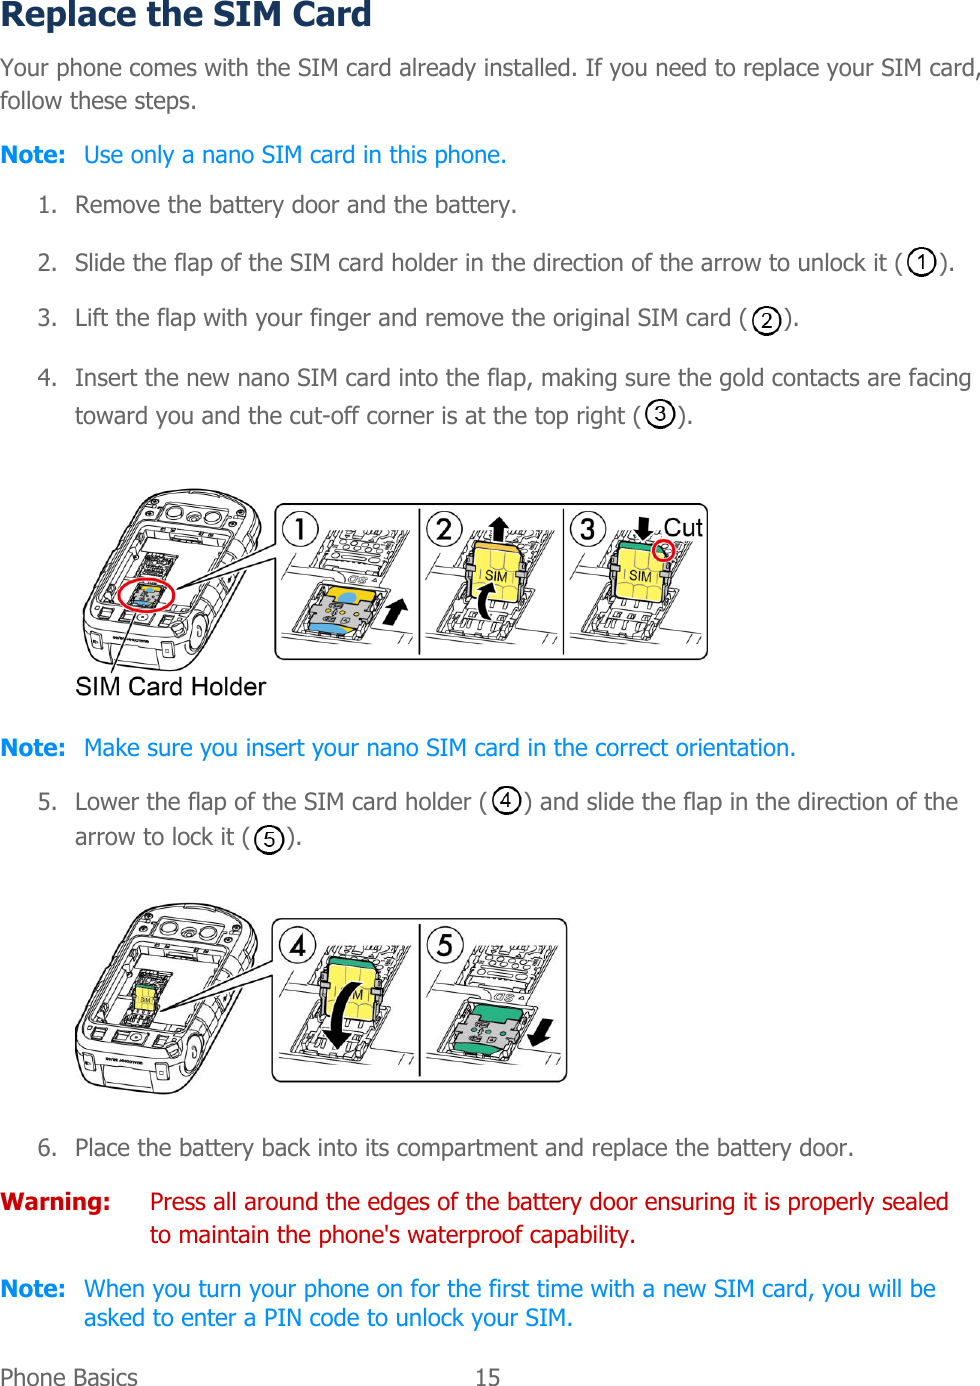  Phone Basics  15   Replace the SIM Card Your phone comes with the SIM card already installed. If you need to replace your SIM card, follow these steps. Note:  Use only a nano SIM card in this phone. 1. Remove the battery door and the battery. 2. Slide the flap of the SIM card holder in the direction of the arrow to unlock it ( ). 3. Lift the flap with your finger and remove the original SIM card ( ). 4. Insert the new nano SIM card into the flap, making sure the gold contacts are facing toward you and the cut-off corner is at the top right ( ).  Note:  Make sure you insert your nano SIM card in the correct orientation. 5. Lower the flap of the SIM card holder ( ) and slide the flap in the direction of the arrow to lock it ( ).  6. Place the battery back into its compartment and replace the battery door. Warning:  Press all around the edges of the battery door ensuring it is properly sealed to maintain the phone&apos;s waterproof capability. Note:  When you turn your phone on for the first time with a new SIM card, you will be asked to enter a PIN code to unlock your SIM. 